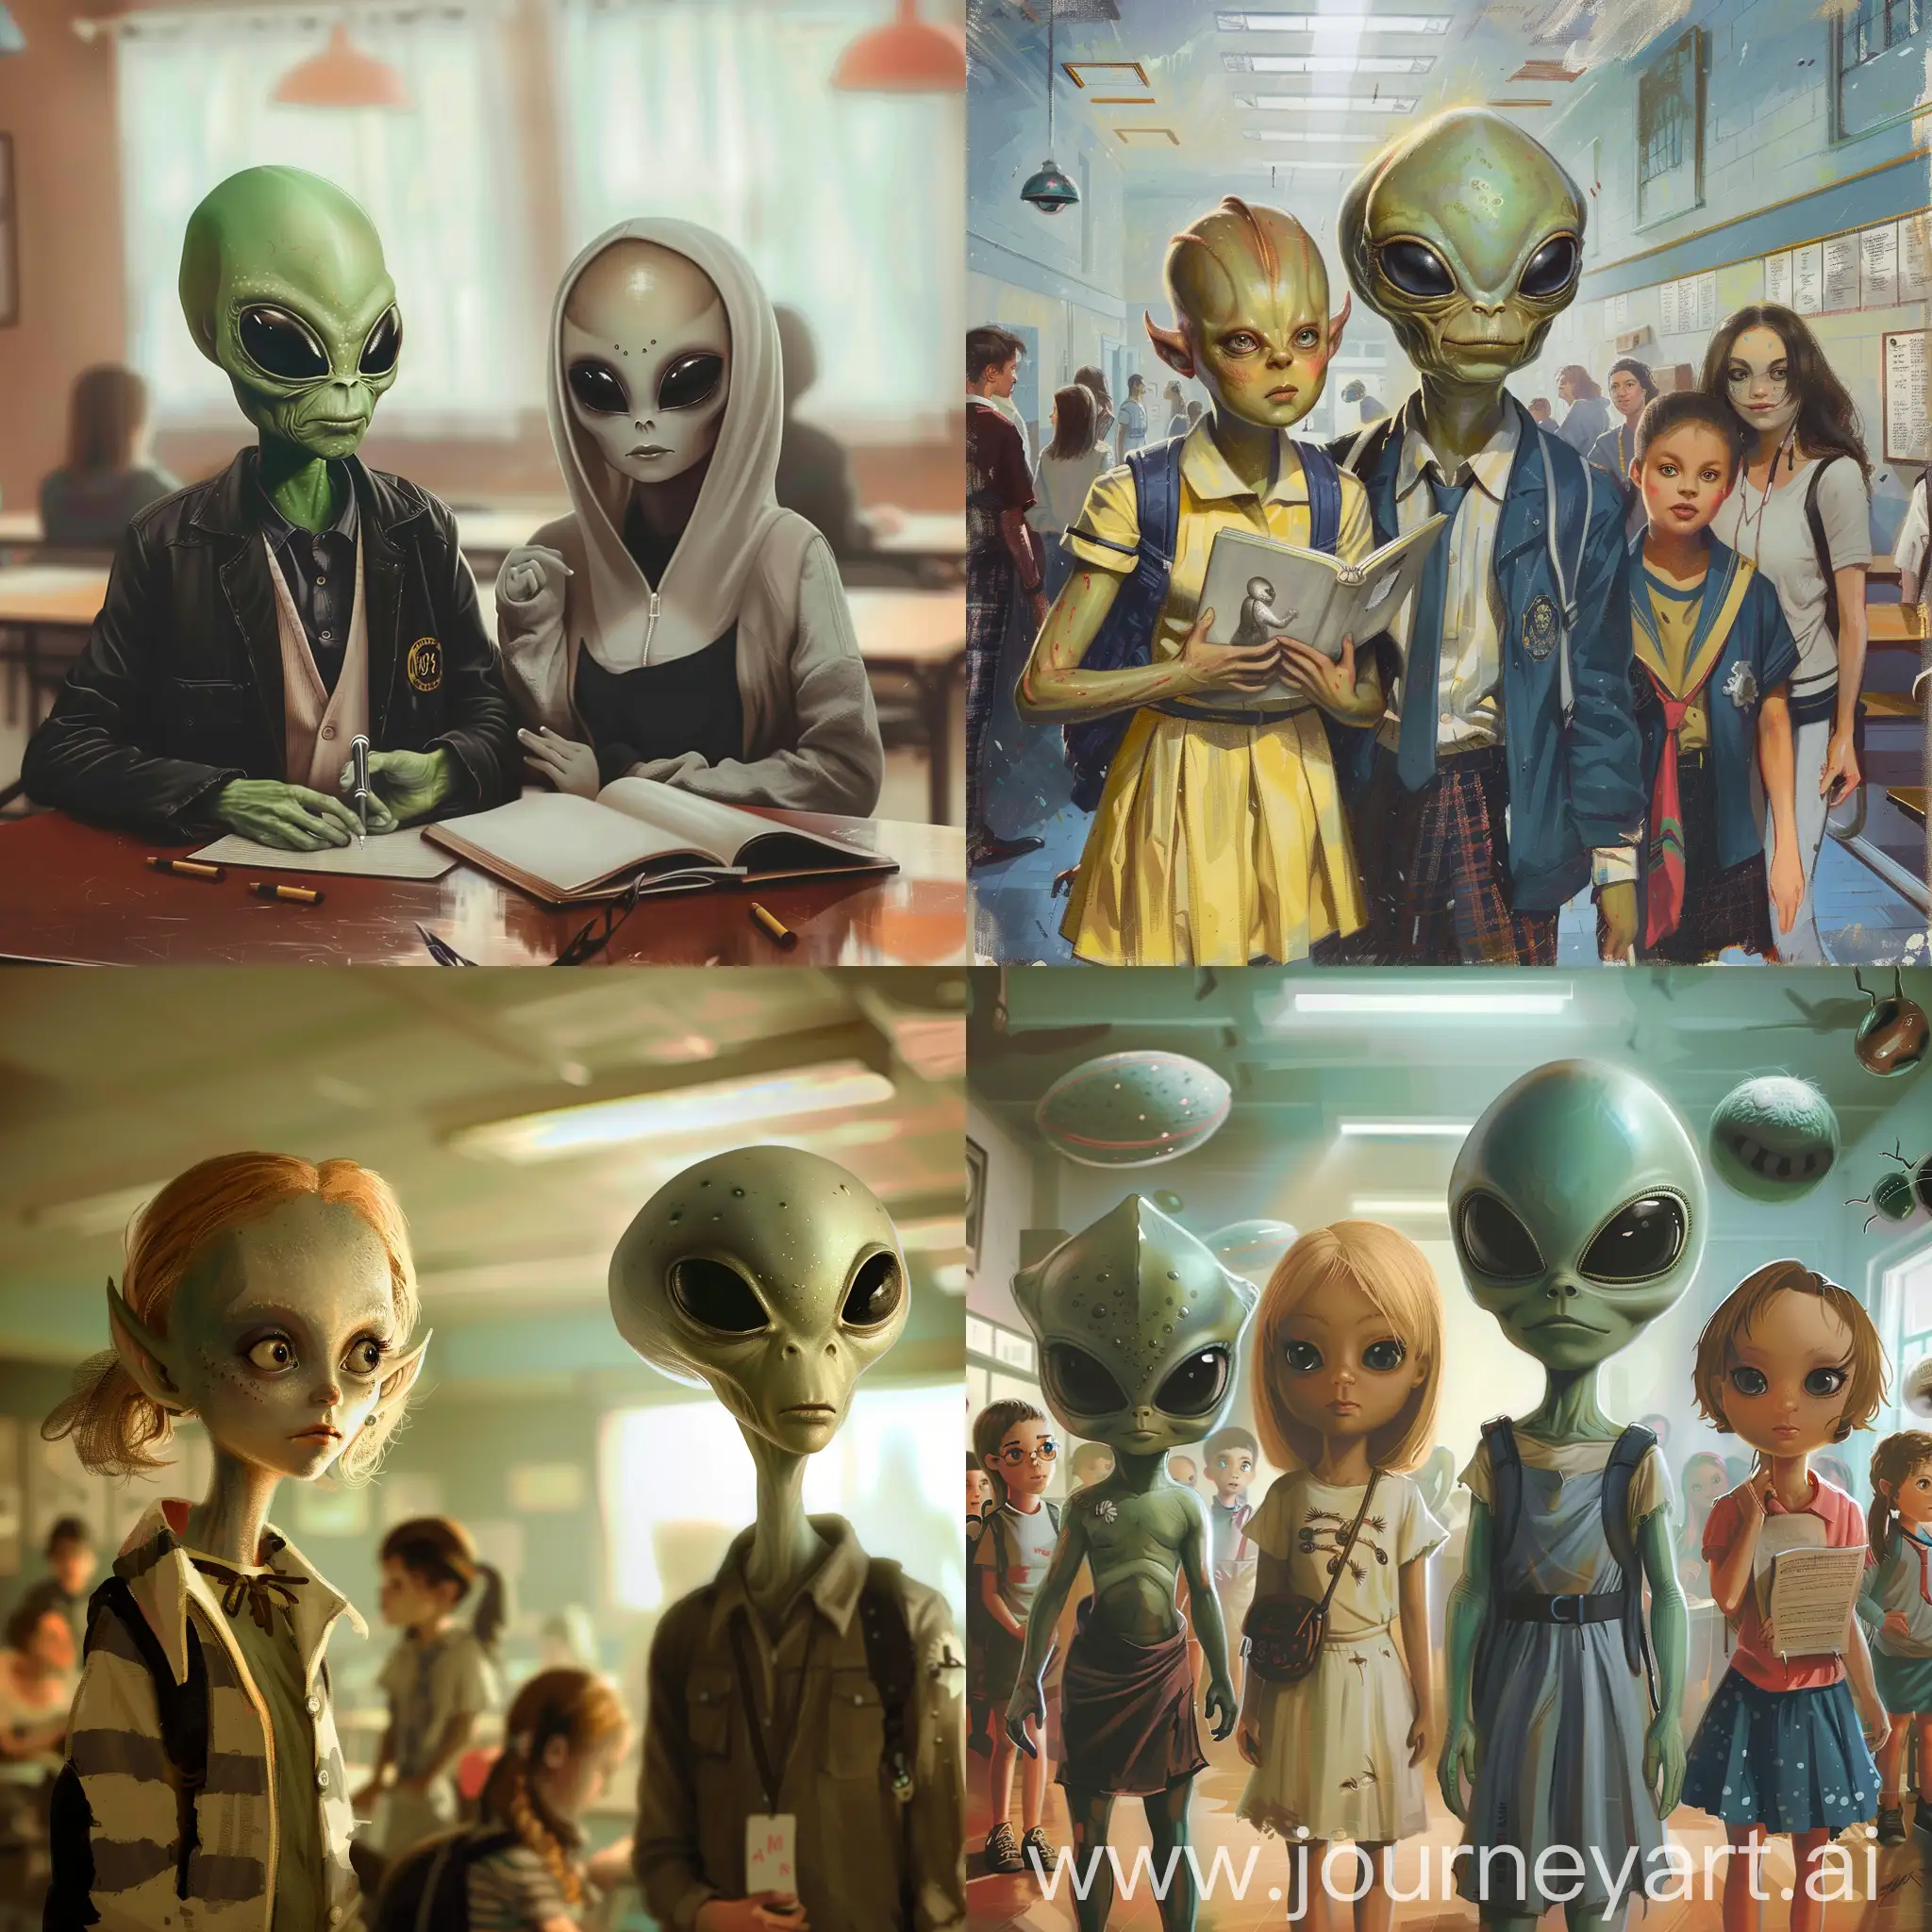 Humans and Aliens in school together